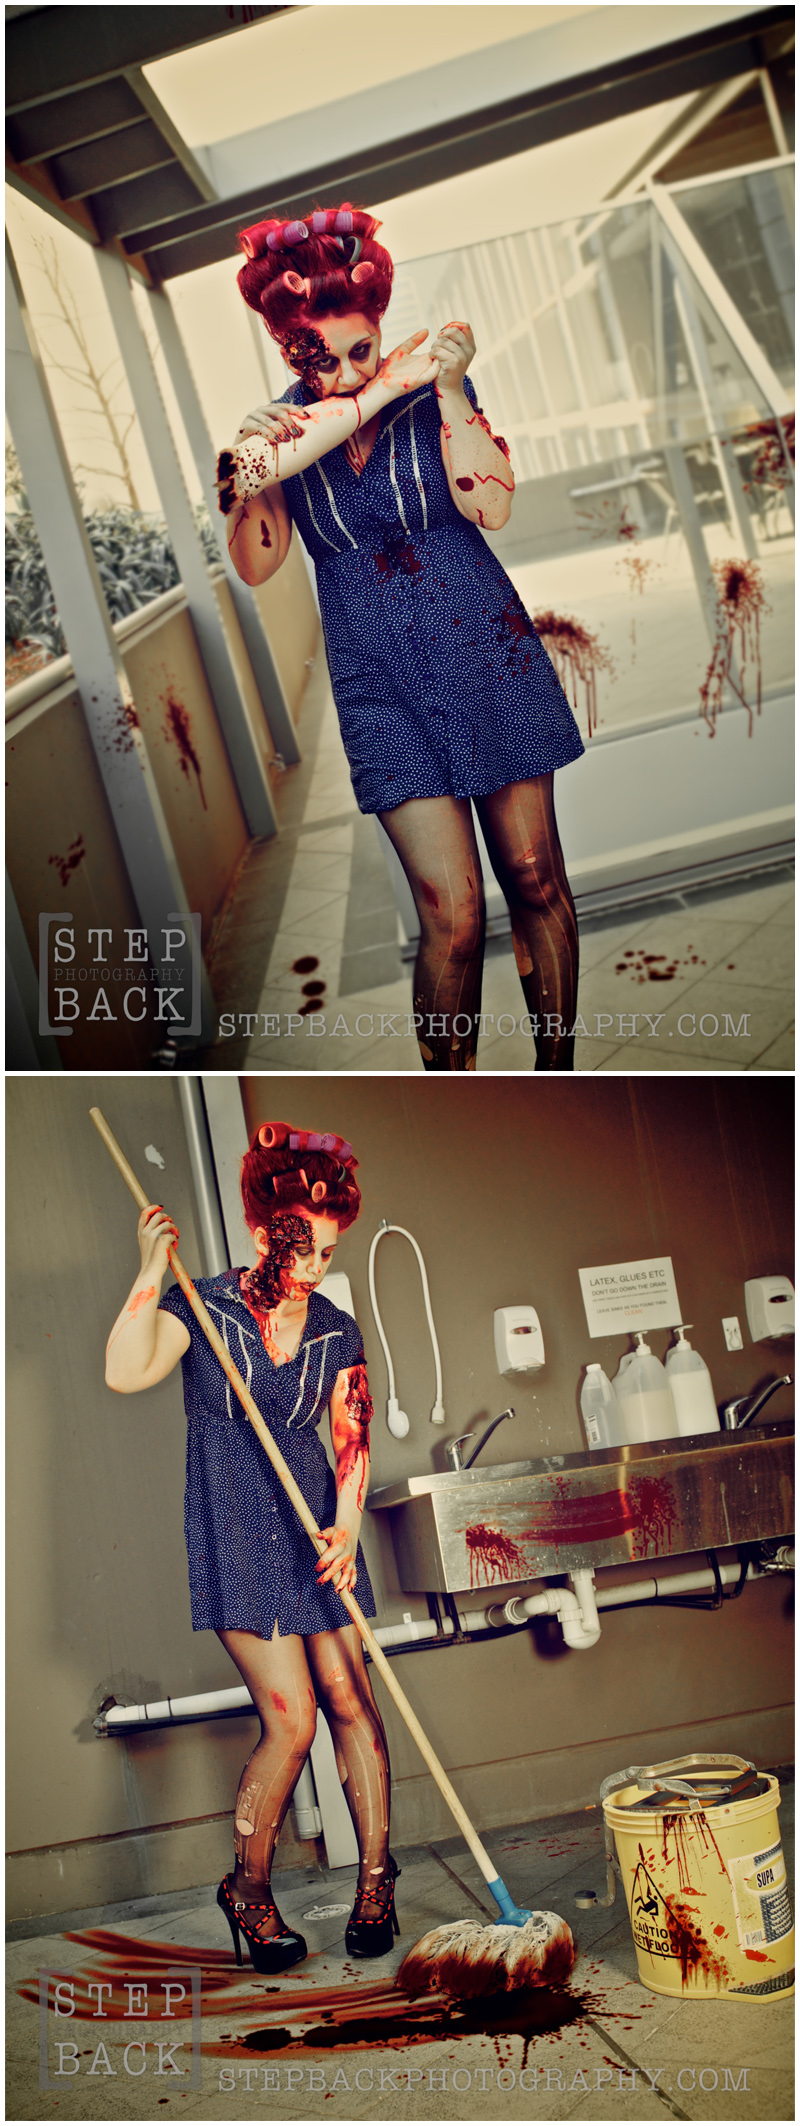 Male and Female model photo shoot of STEP BACK Photography and thedeathvalleygirl, makeup by Connie Giaquinto